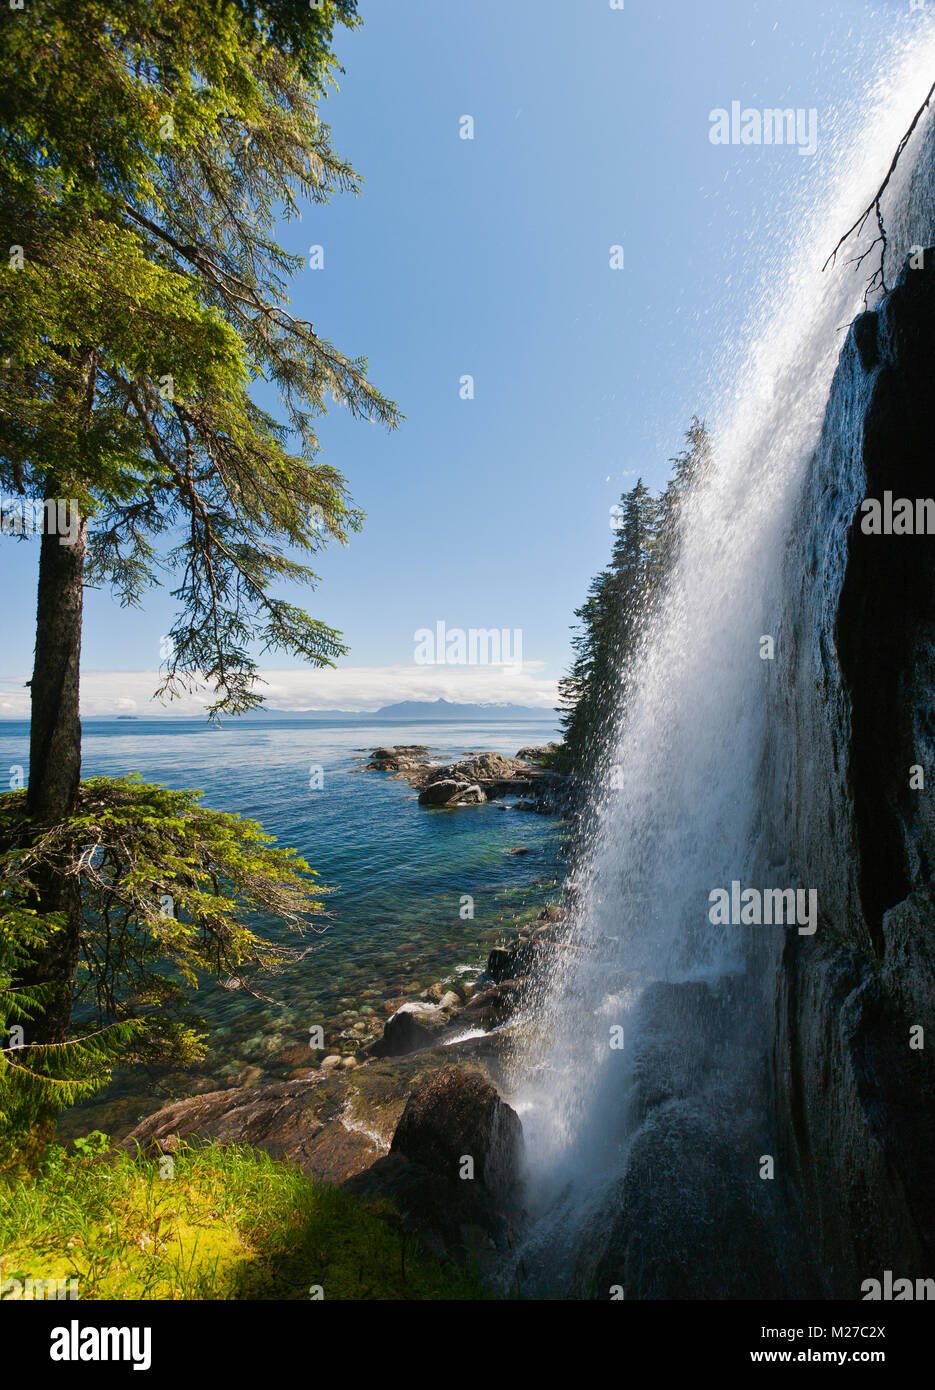 Side view of unnamed waterfall along Chatham Strait on east side of Baranof Island in the Inside Passage of Southeast Alaska. Stock Photo